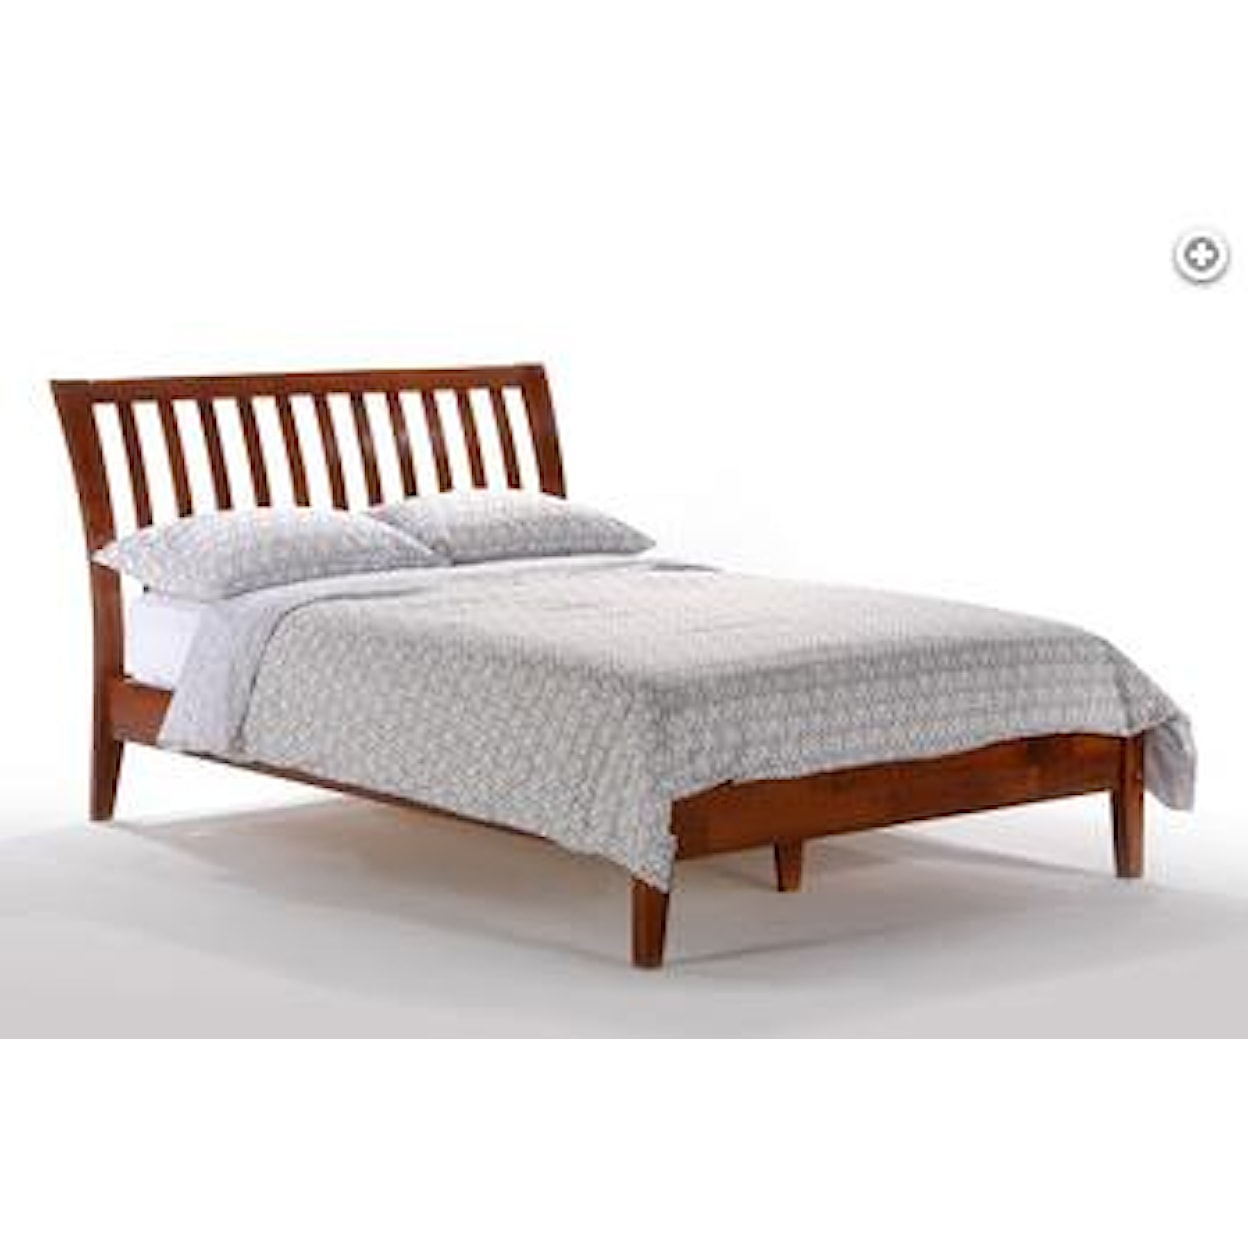 Pacific Manufacturing Nutmeg Cal King Bed